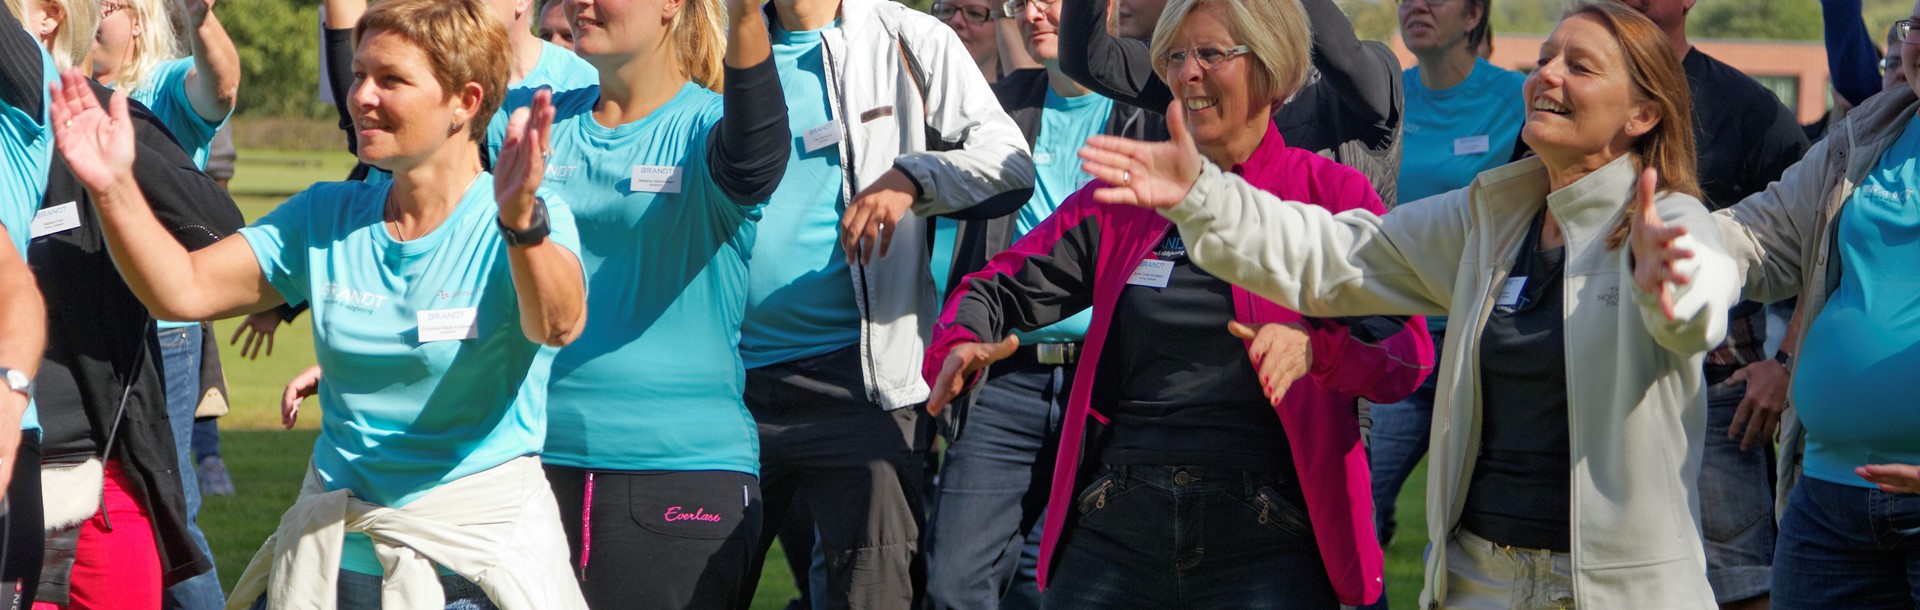 Vingsted event_Energizers 4.jpg